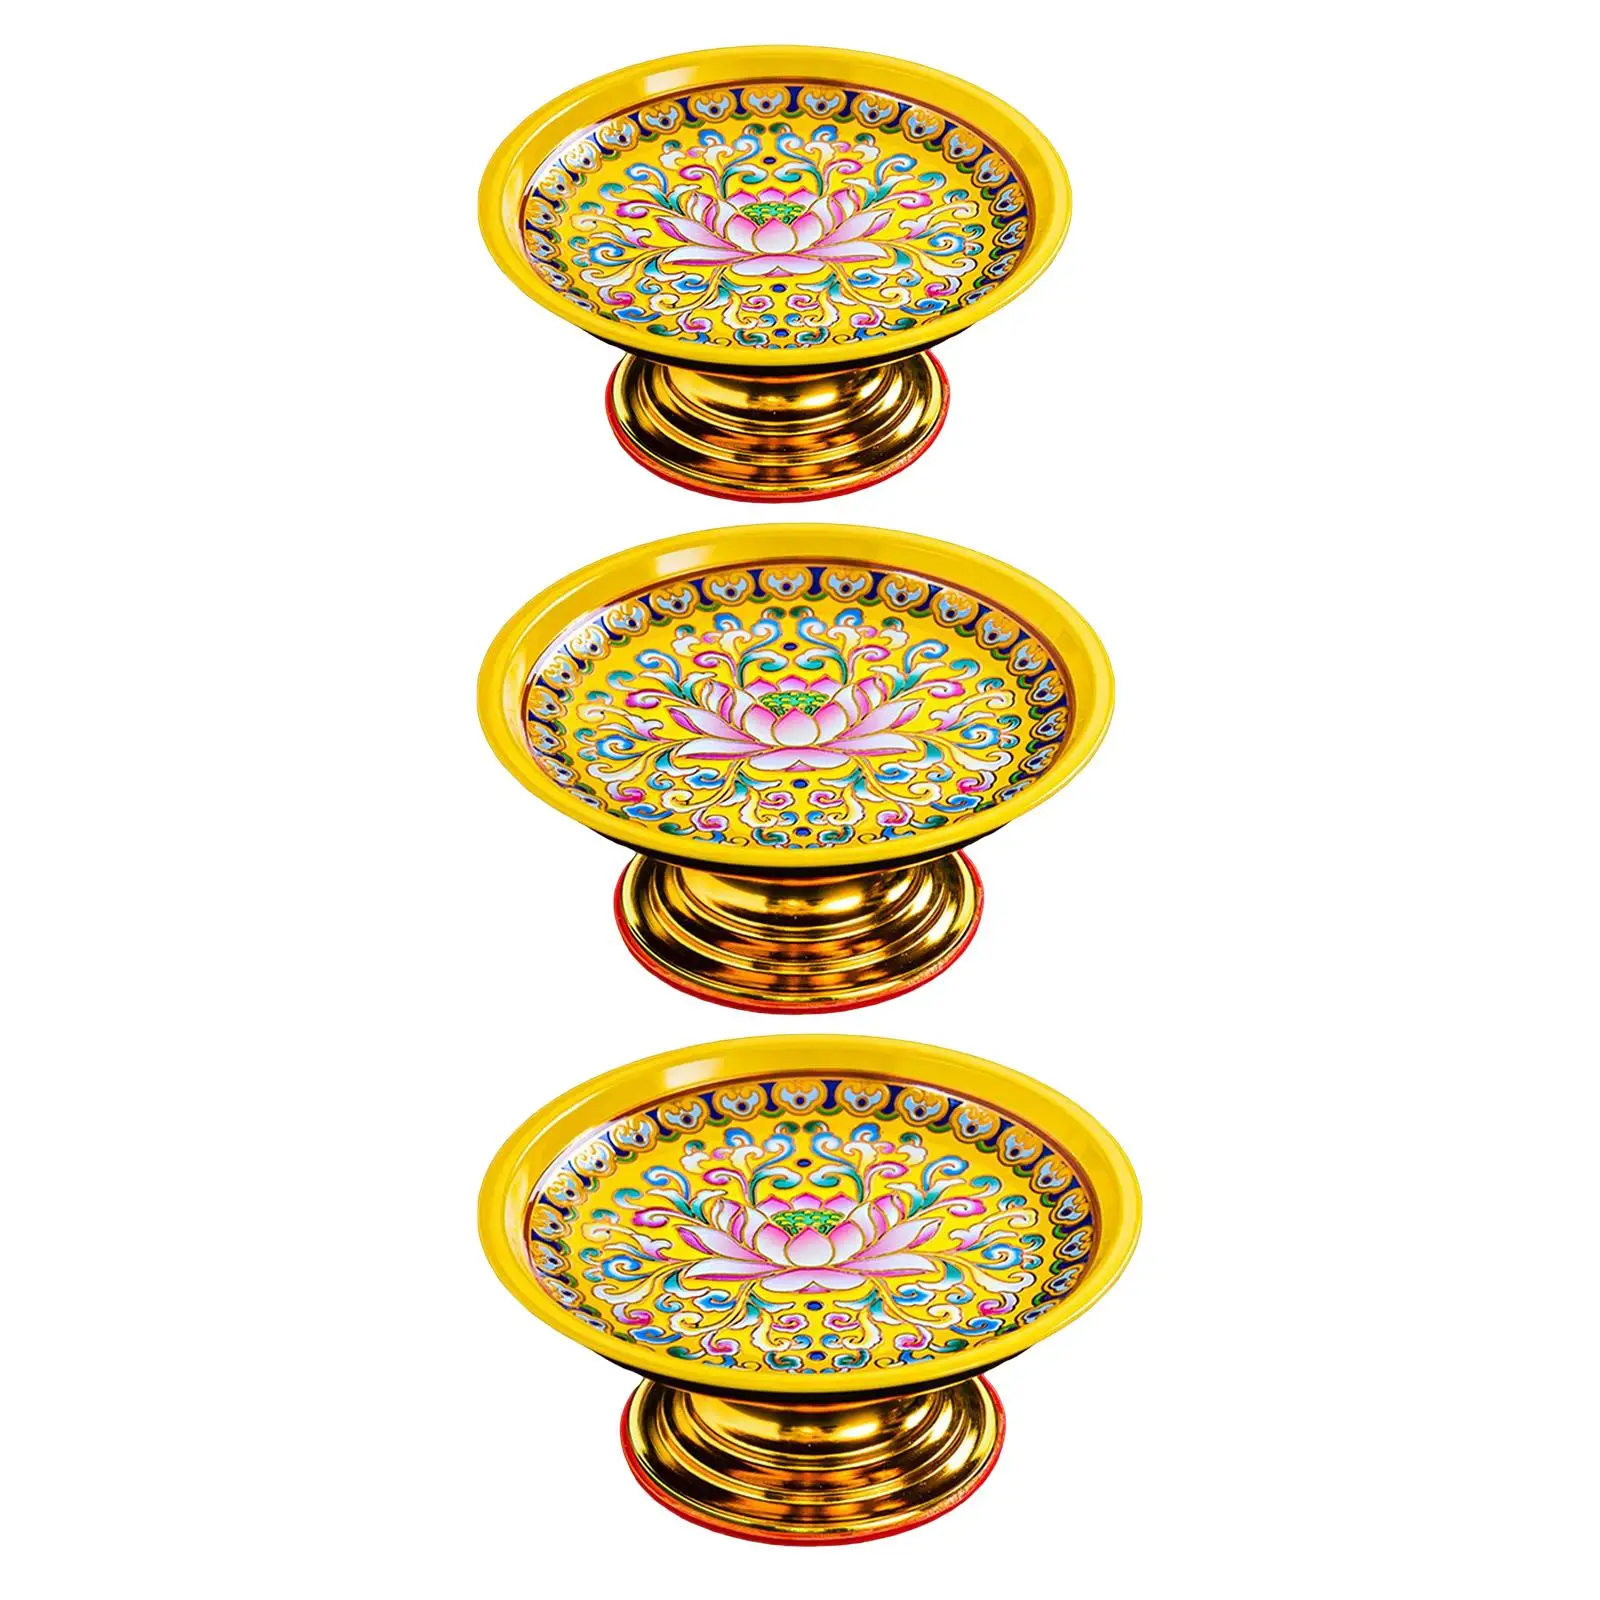 Temple Serving Tray Desktop Organizer Easy to Fill Counter Storage Tray Alloy Shinny Look Buddhist Plate Offering Bowl